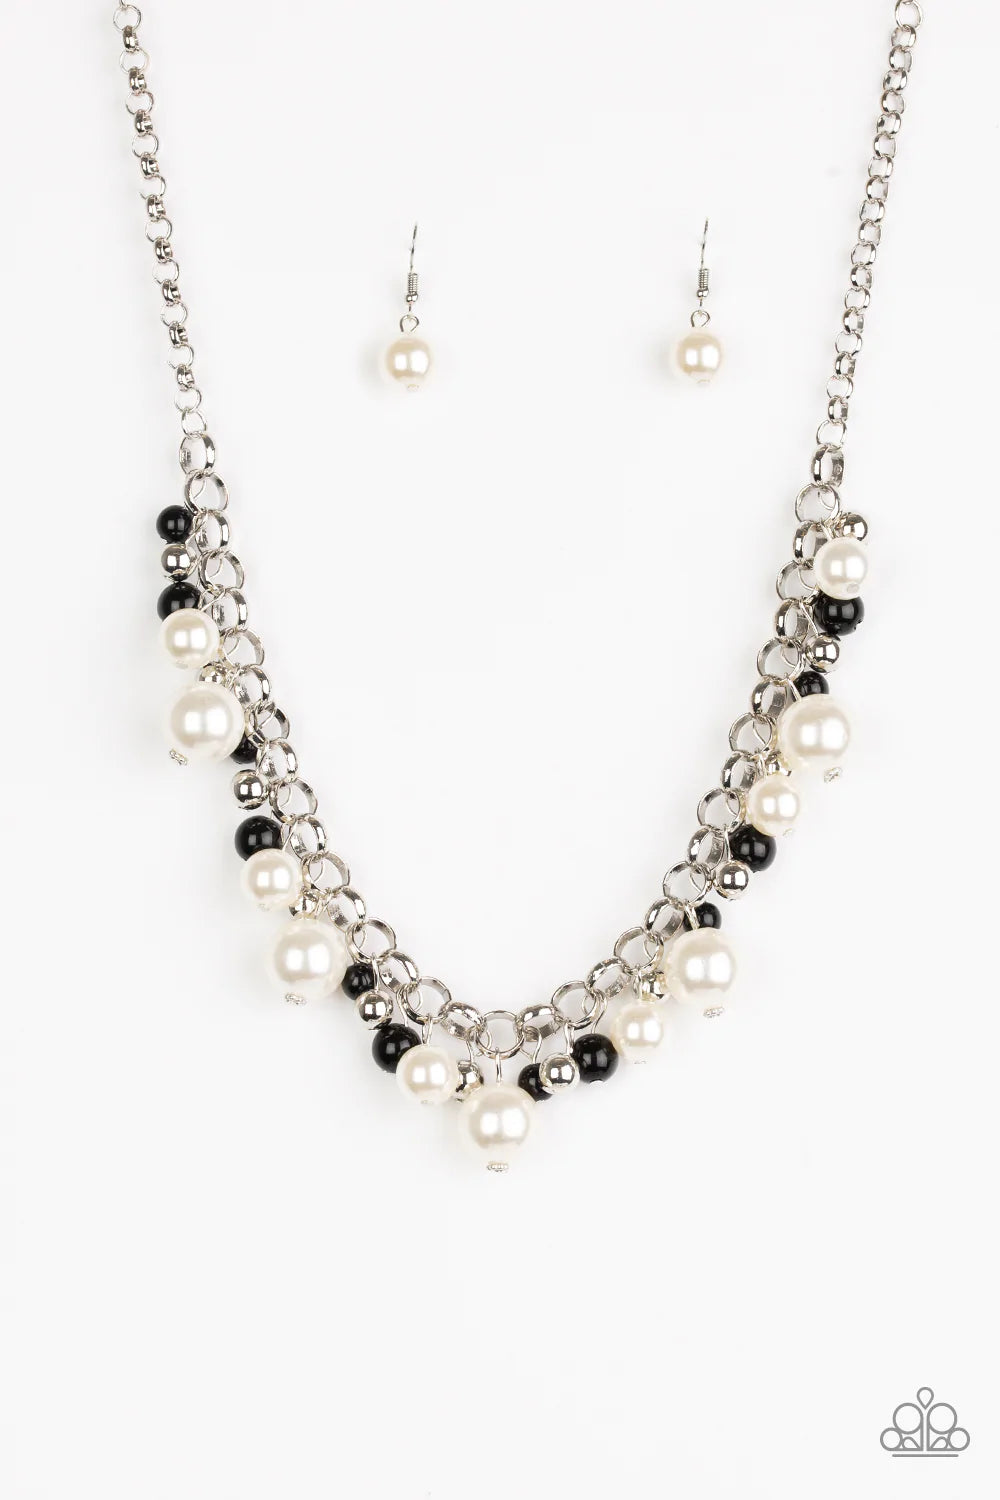 Paparazzi Necklace ~ The Upstater - Black